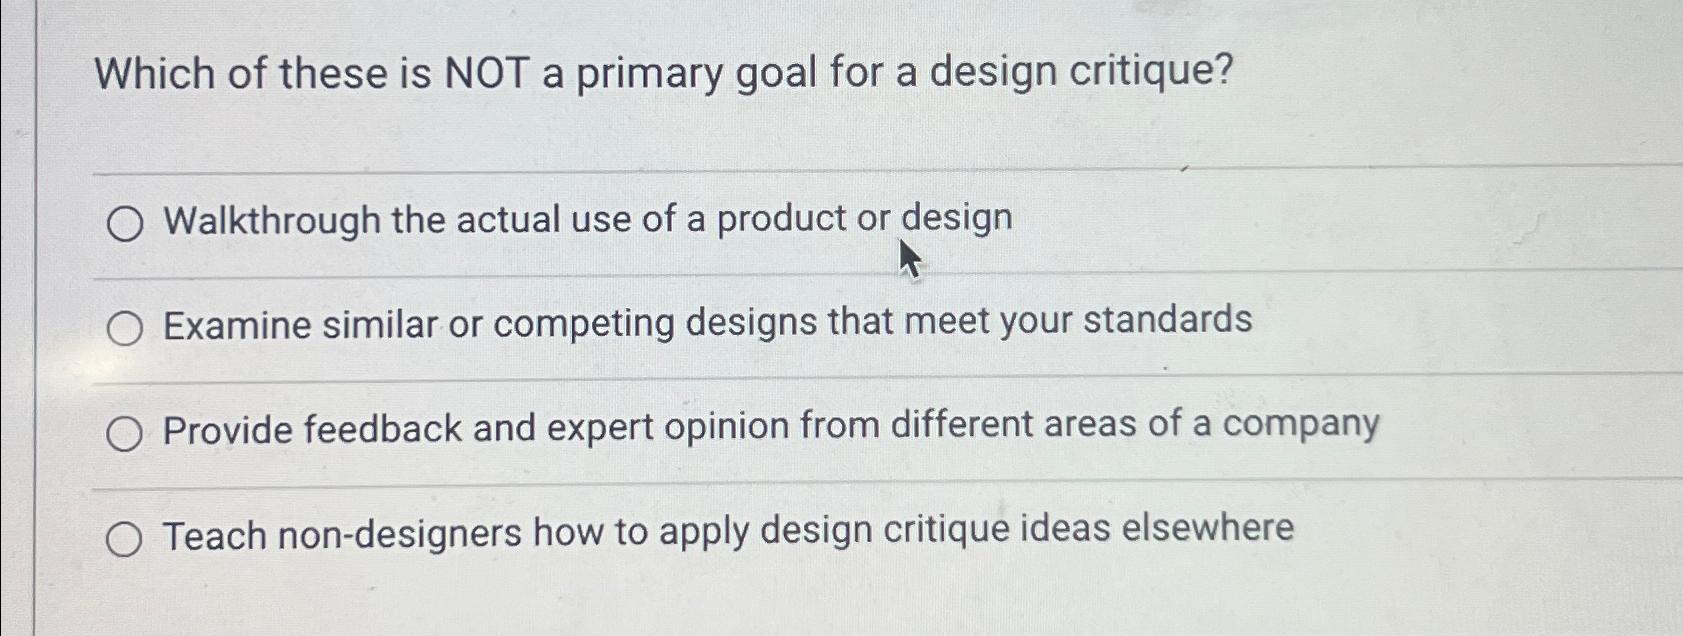 Which of these is NOT a primary goal for a design critique? O Walkthrough the actual use of a product or